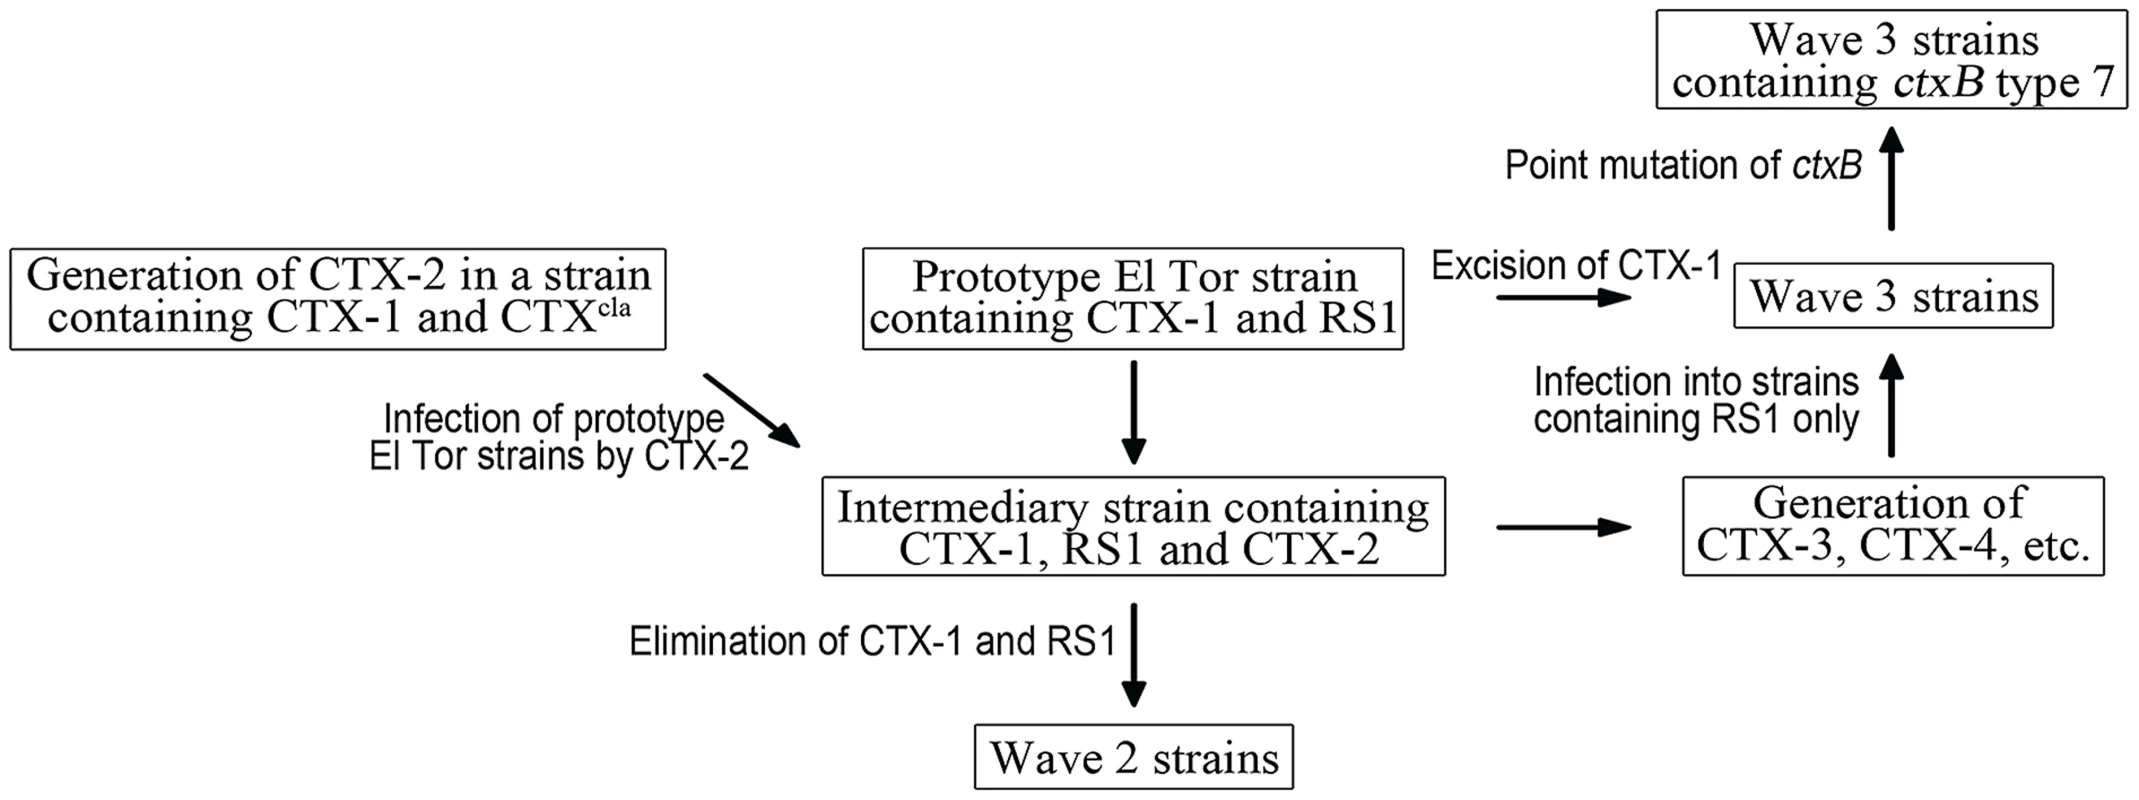 A model of the generation of Wave 2 and Wave 3 strains.